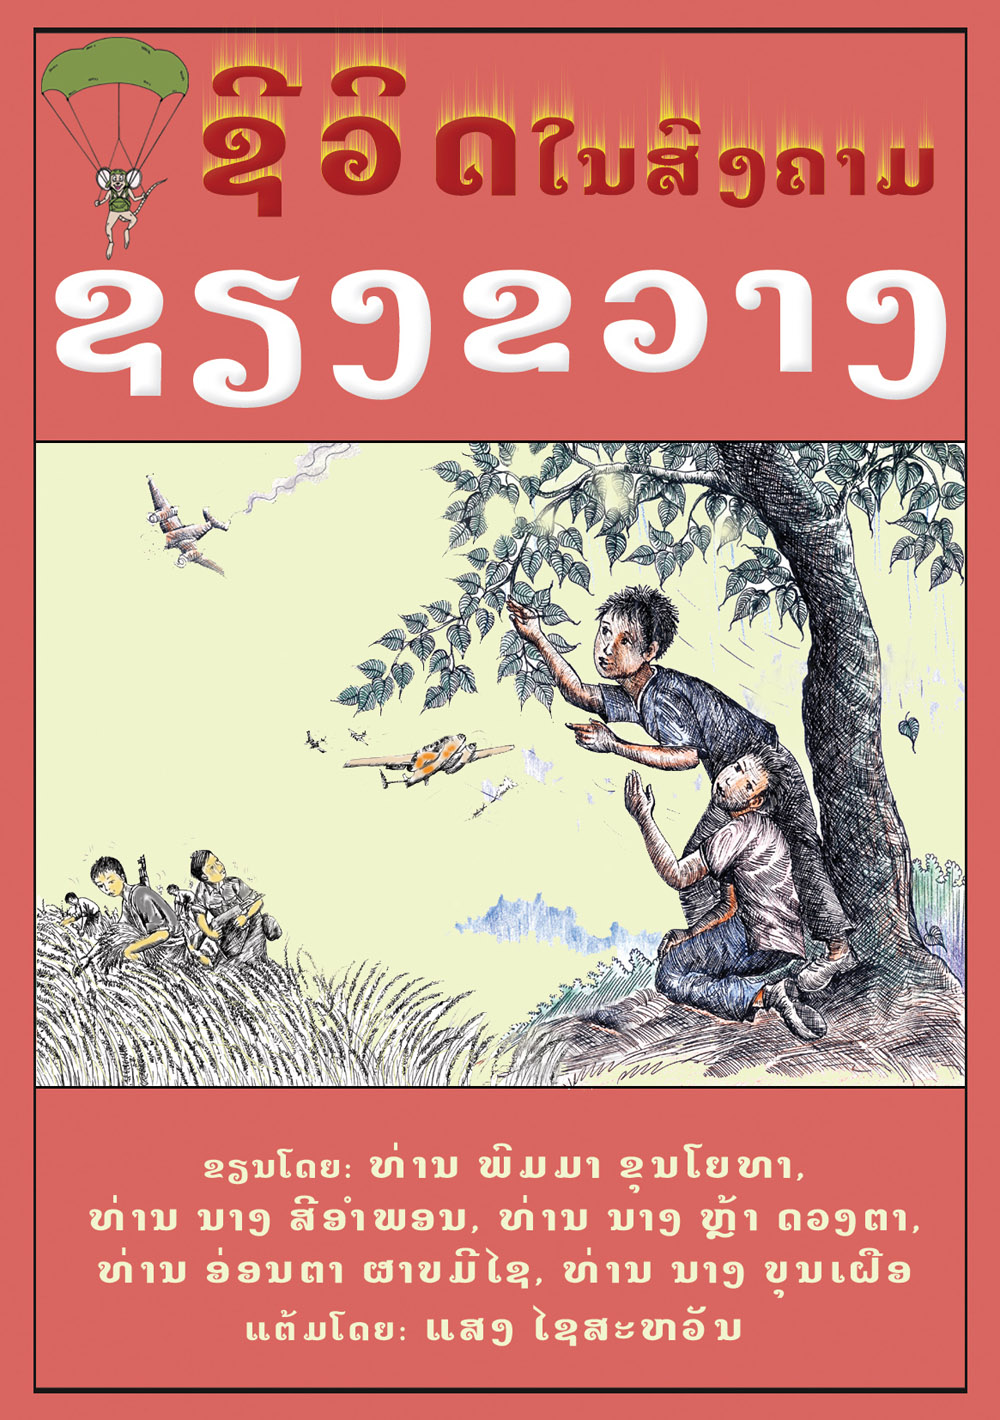 Life in the war from Xieng Khuang large book cover, published in Lao language